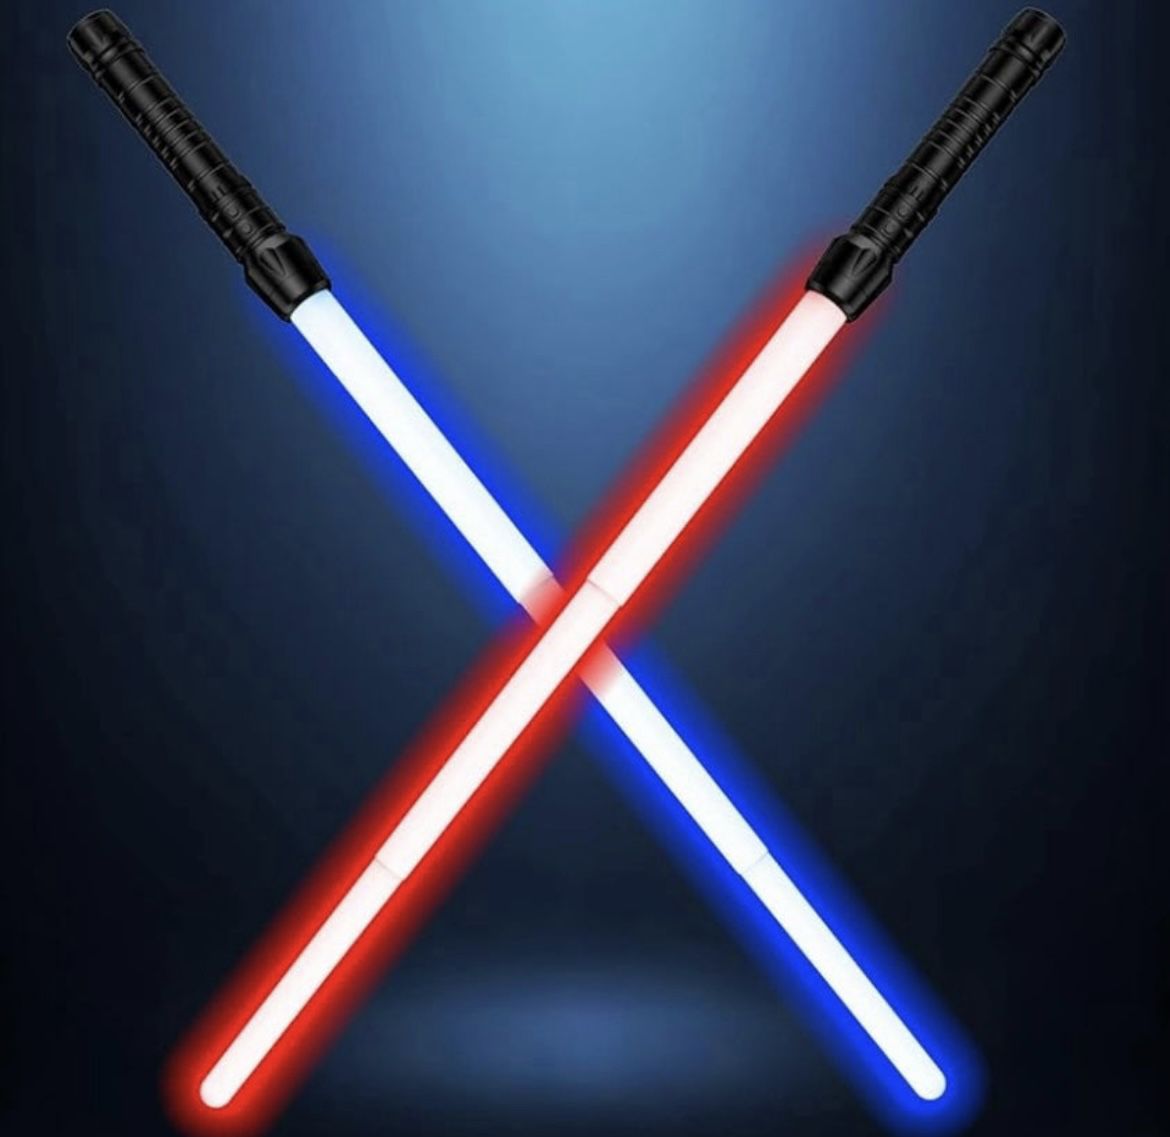 Light Up Saber with FX Sound, Light Sabers for Kids with Realistic Handle